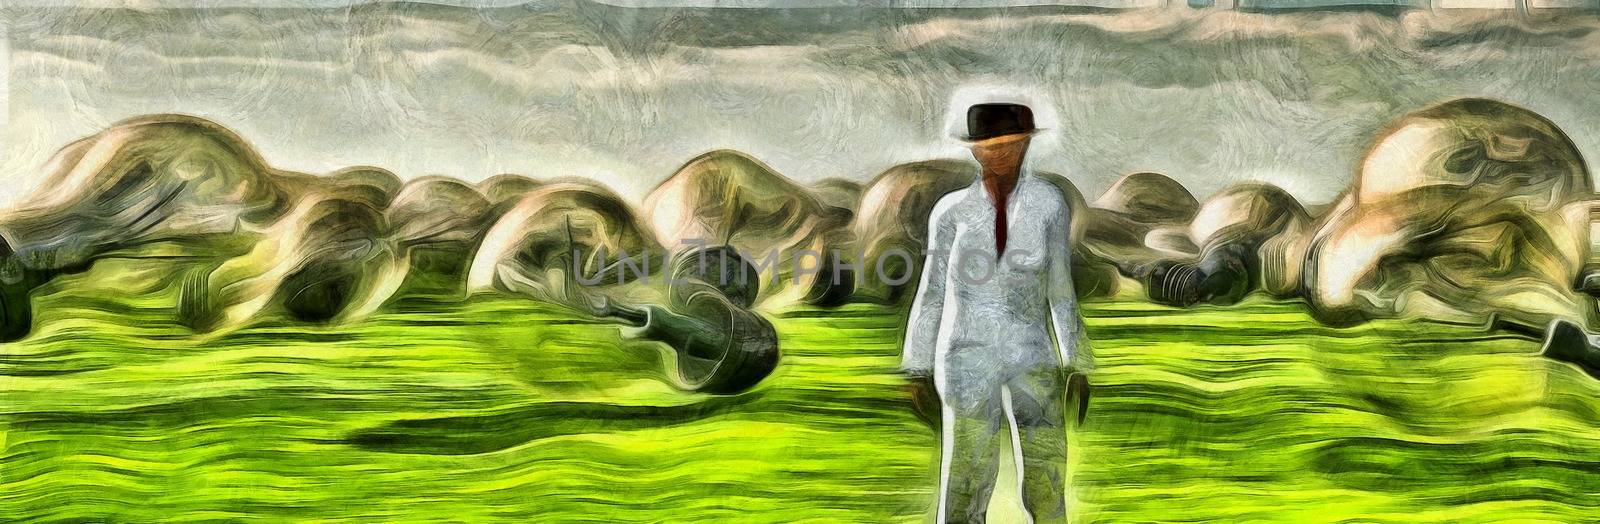 Surreal painting. Man in white suit stands in field with giant light bulbs. 3D rendering